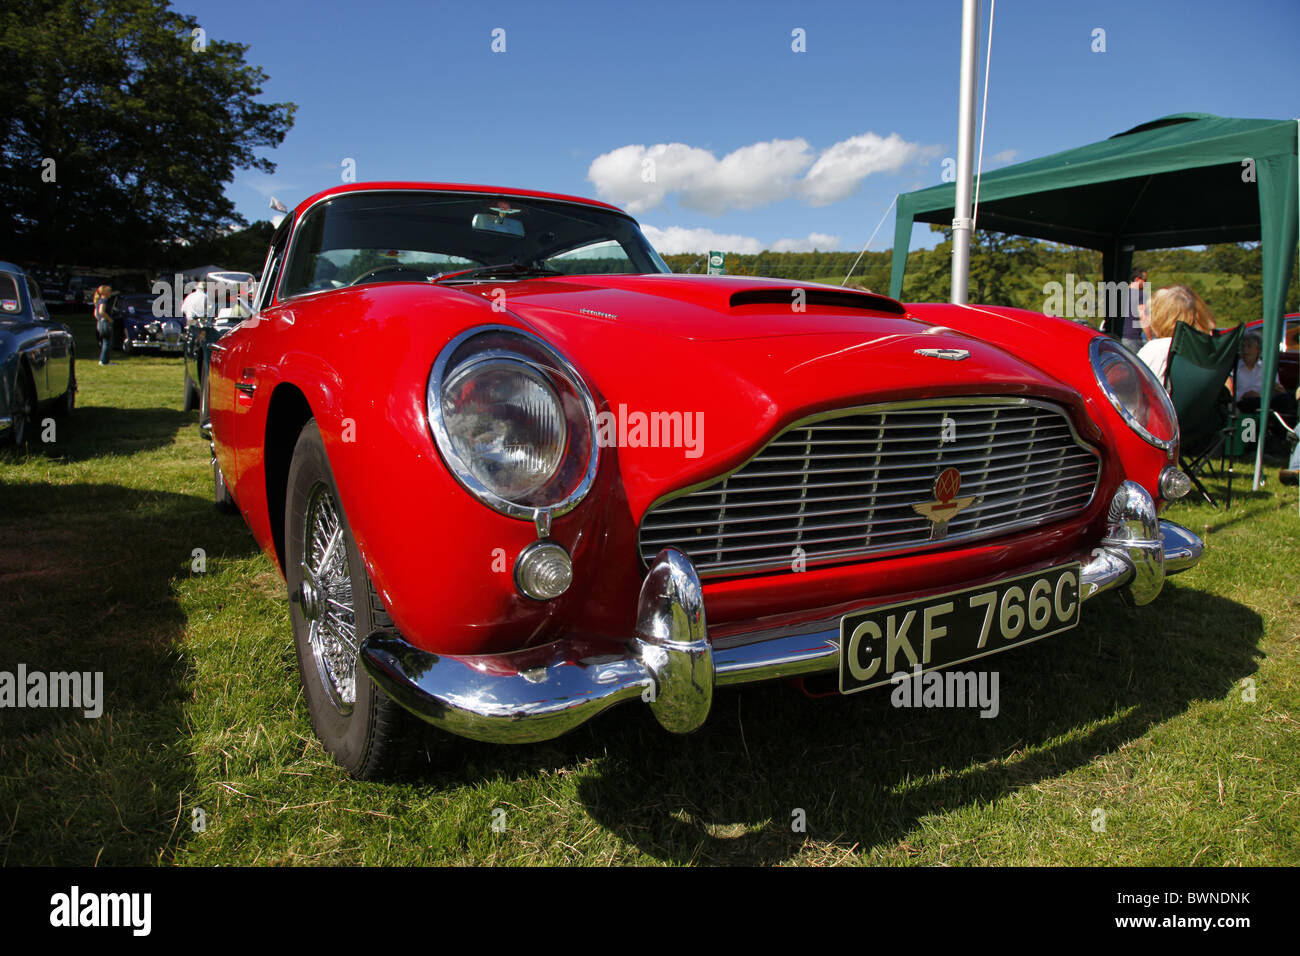 RED ASTON MARTIN DB5 CAR STAINDROP NORTH YORKSHIRE RABY CASTLE STAINDROP NORTH YORKSHIRE STAINDROP NORTH YORKSHIRE 22 August Stock Photo